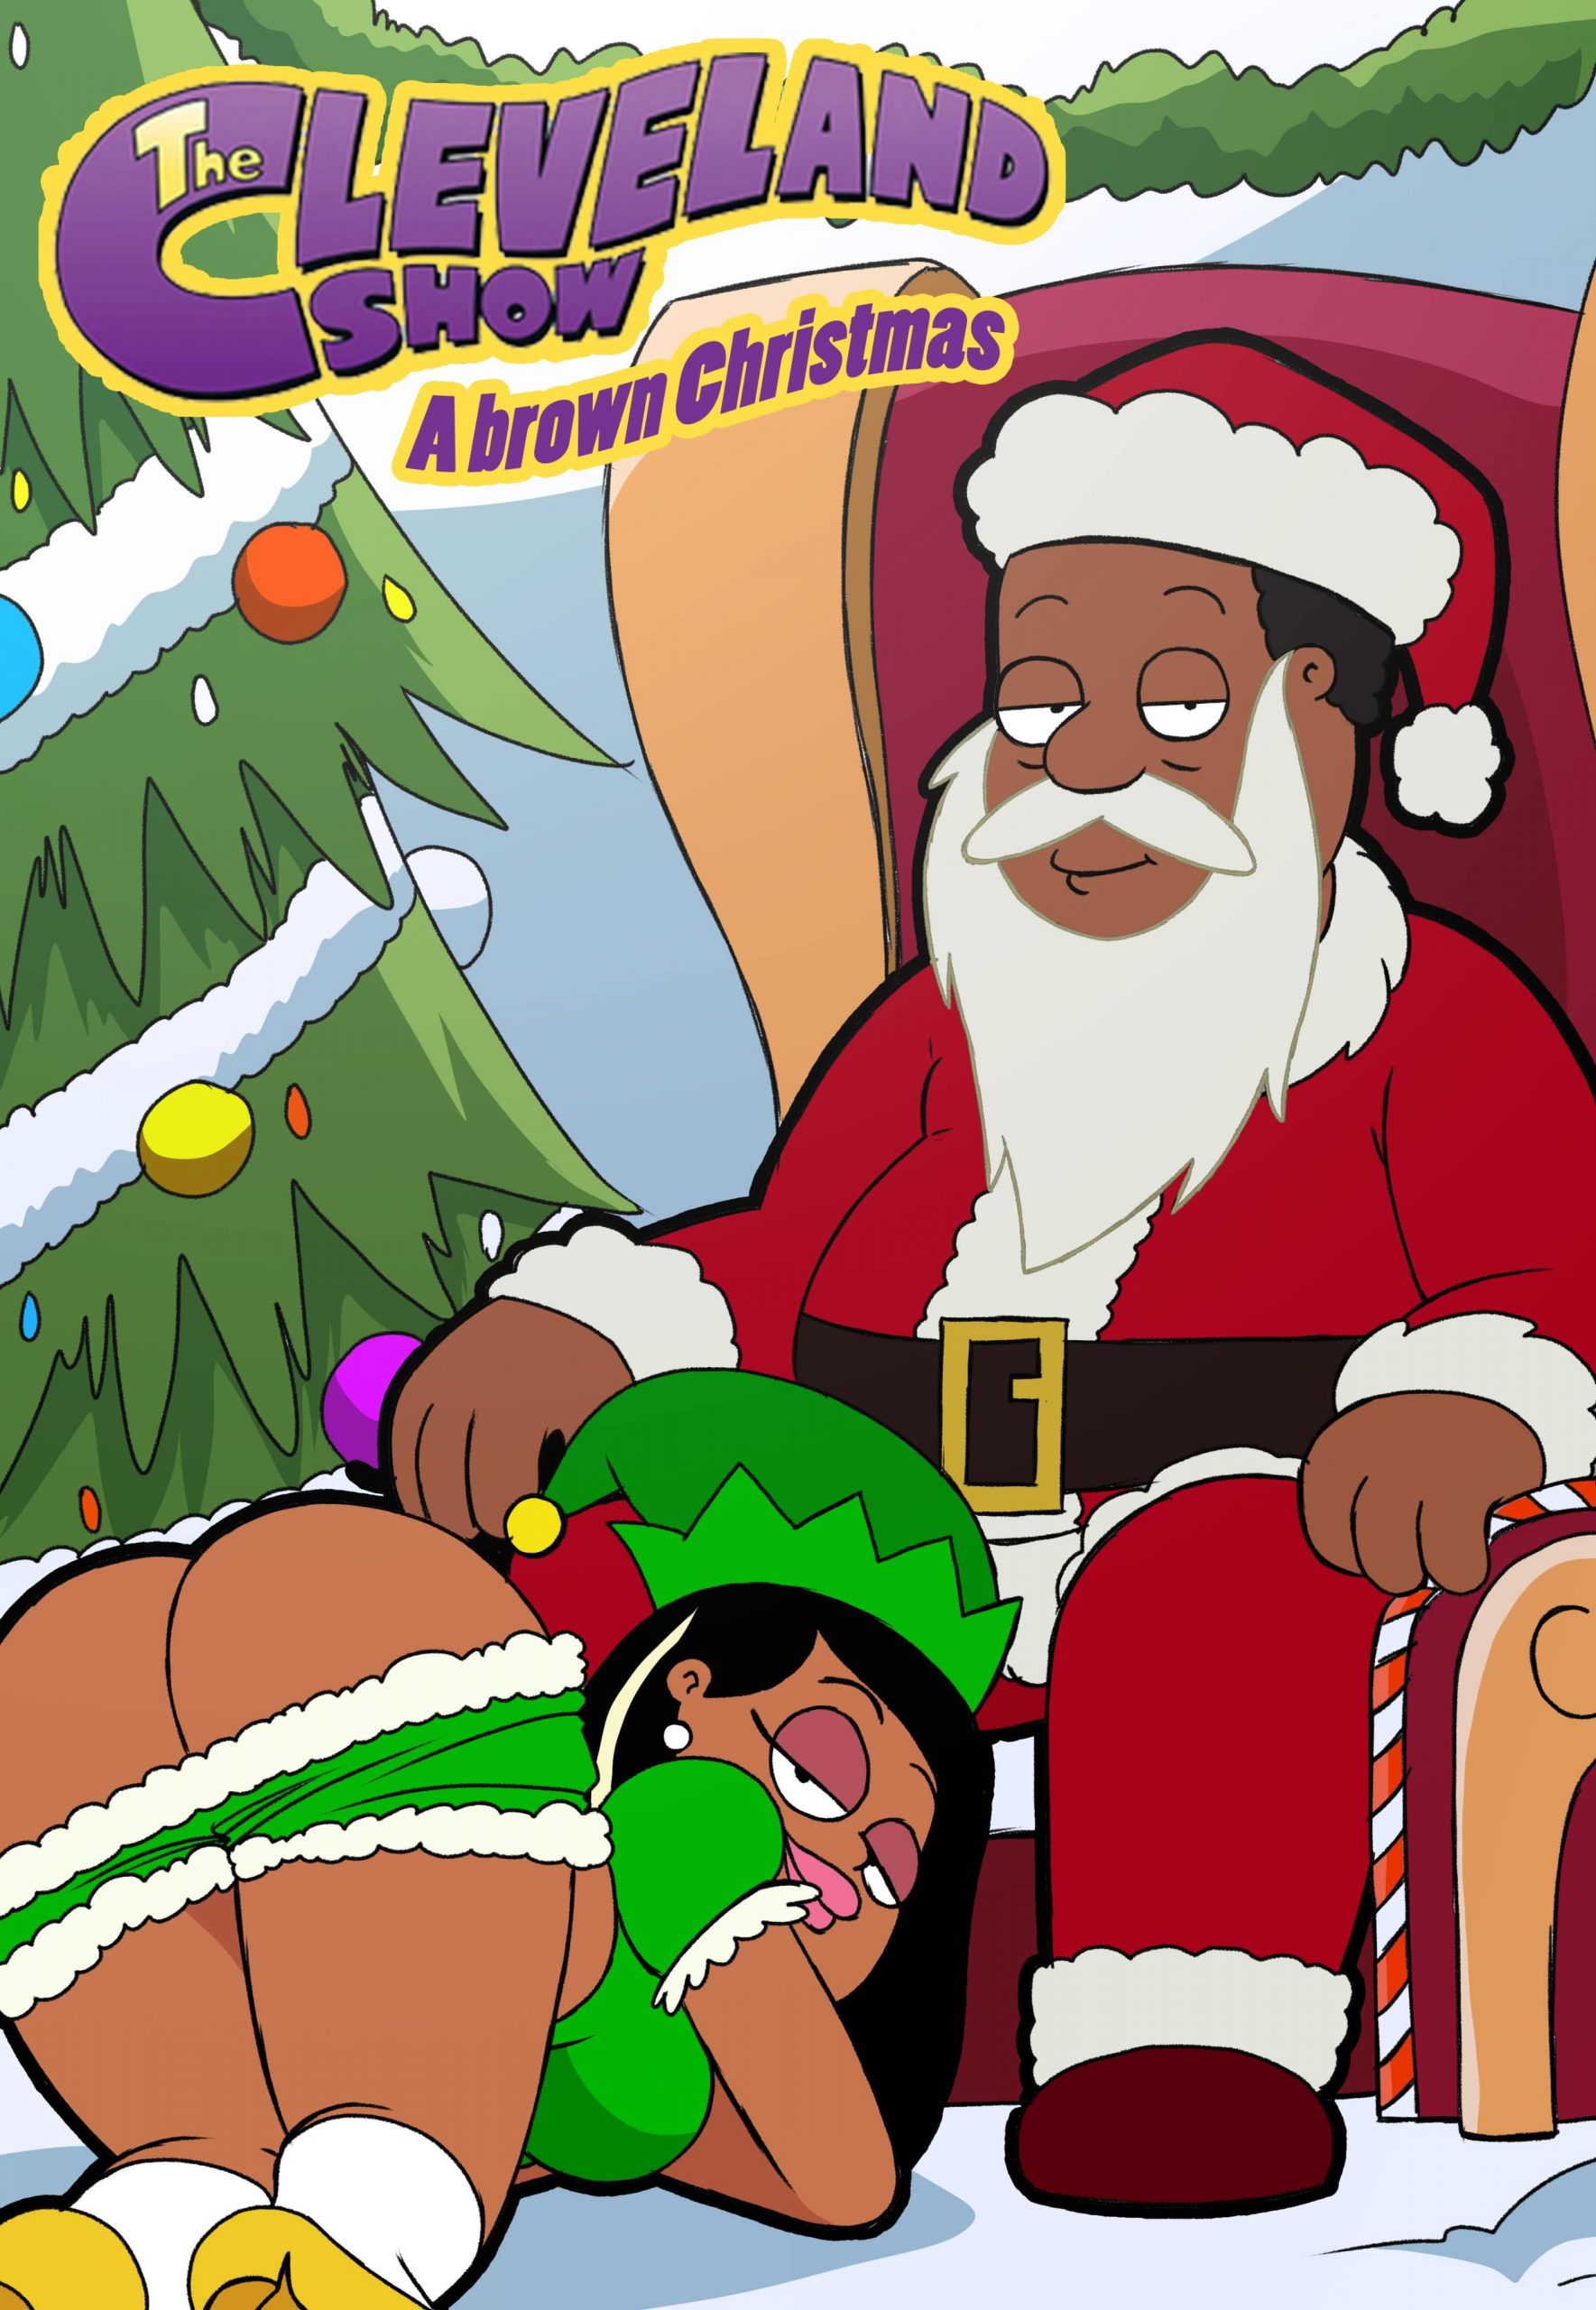 American Dad Cleveland Show Porn Daughters - A brown Christmas Porn Comics by [Inker Shike] (The Cleveland Show) Rule 34  Comics â€“ R34Porn